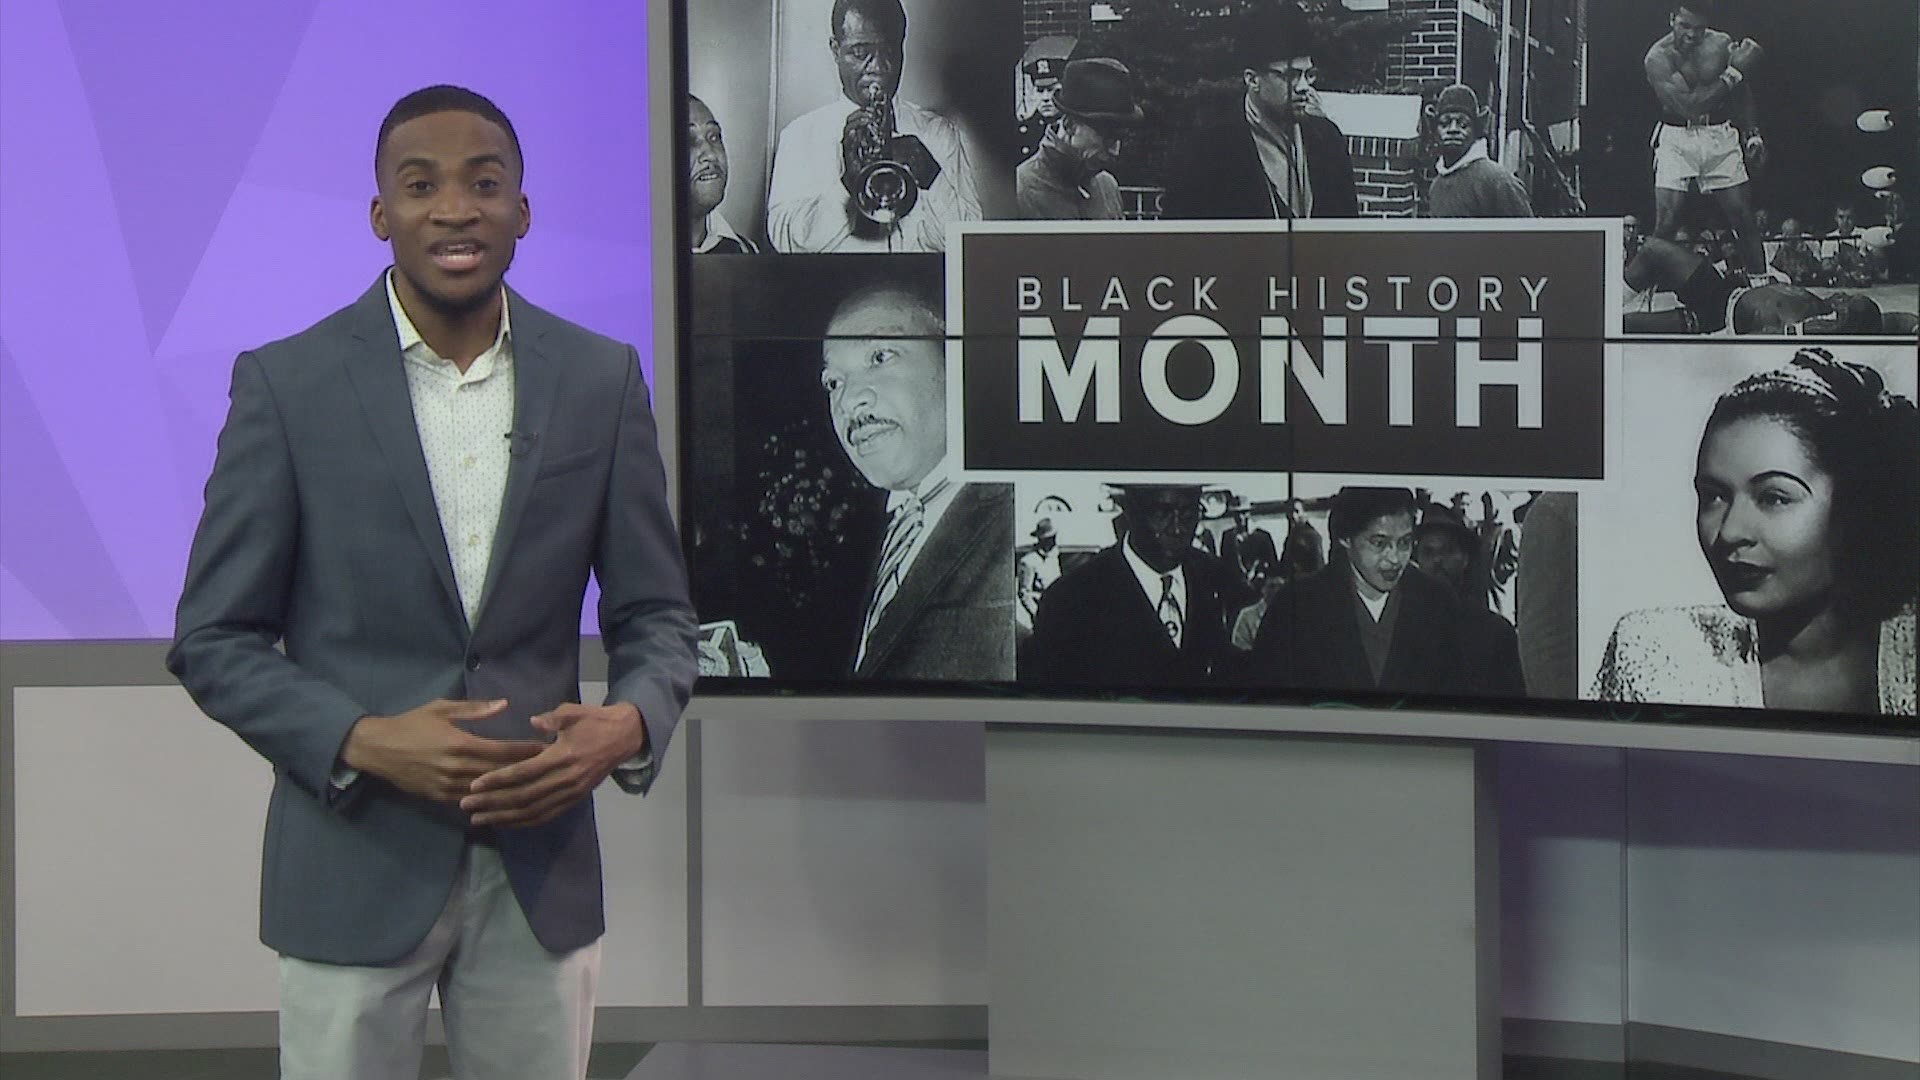 WFMY's Terrence Jefferies had the opportunity to speak with Kenneth Harris, II a Senior Engineer with NASA and member of the Forbes 30 under 30, Class of 2020.